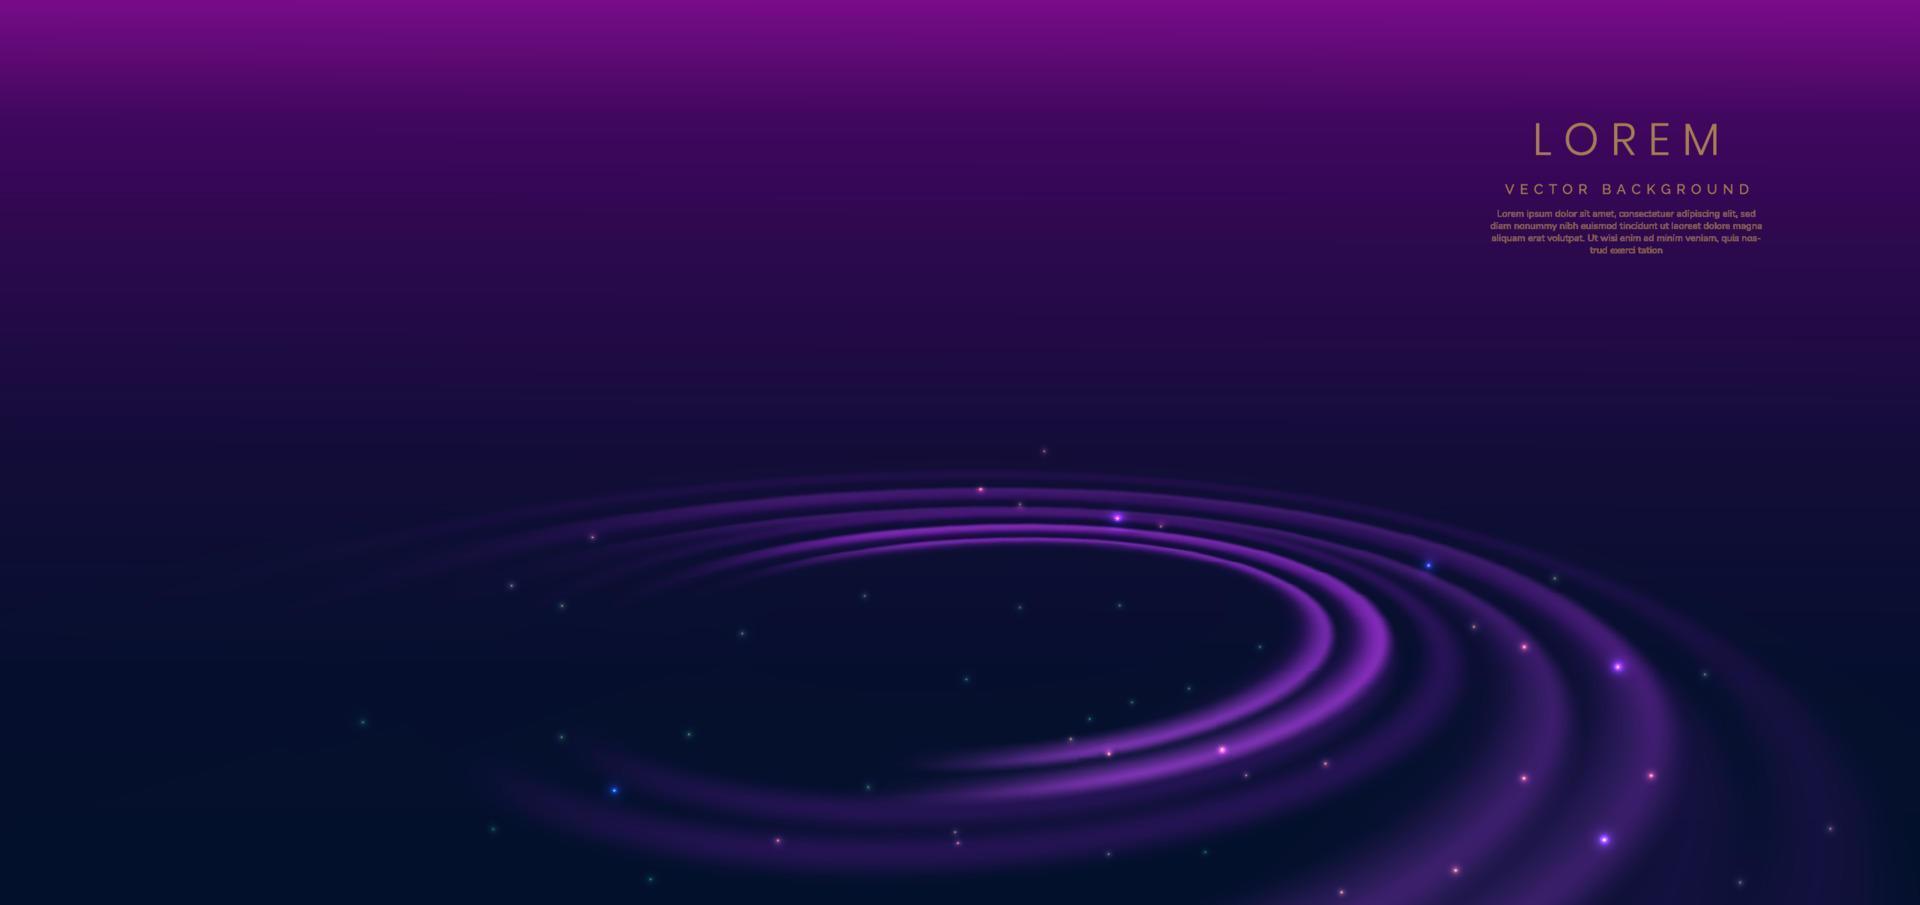 Template premium awards nomination ceremony with curve line and glitter effect with copy space on dark blue and purple background. Vector illustration